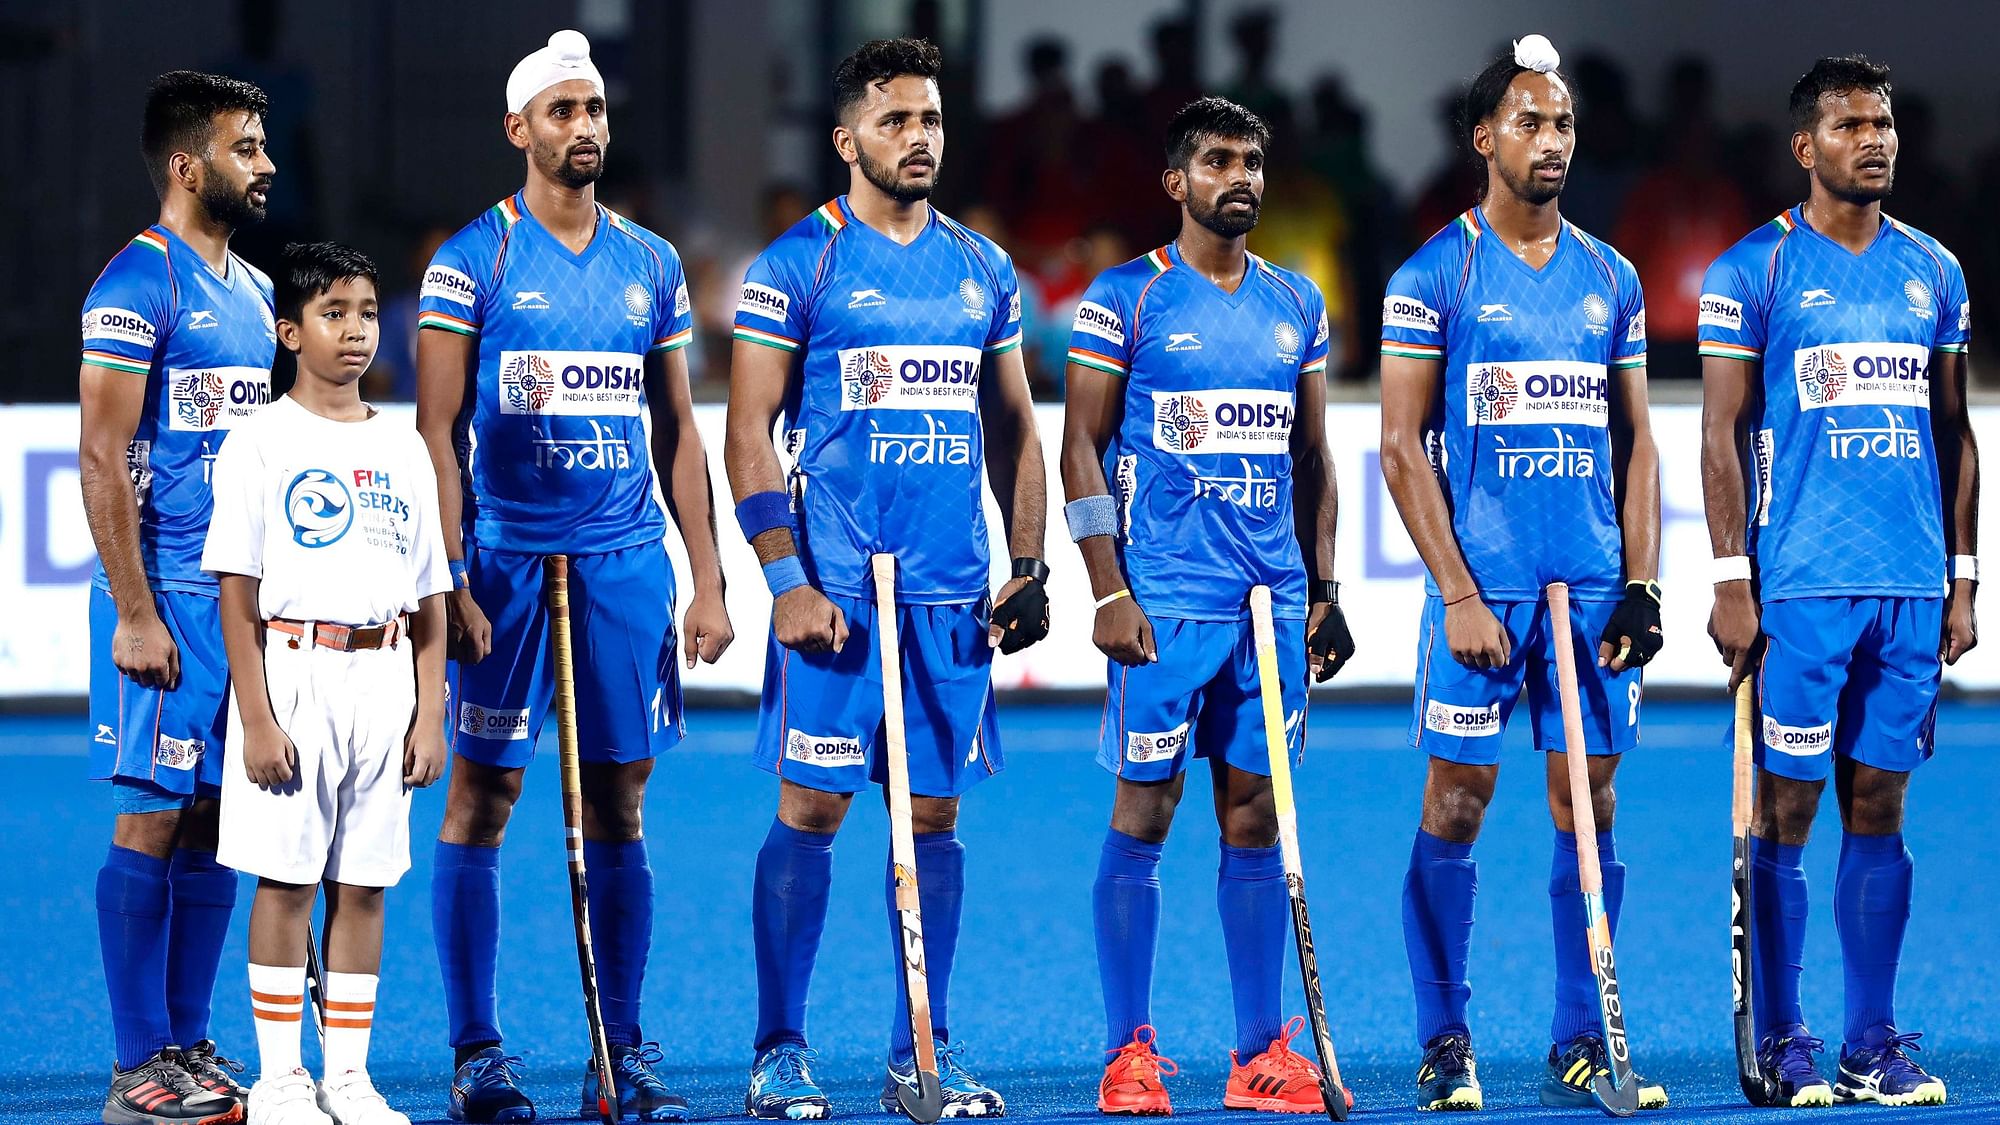 India are currently fifth with 5 points from their two matches which they played against the Dutch in January.